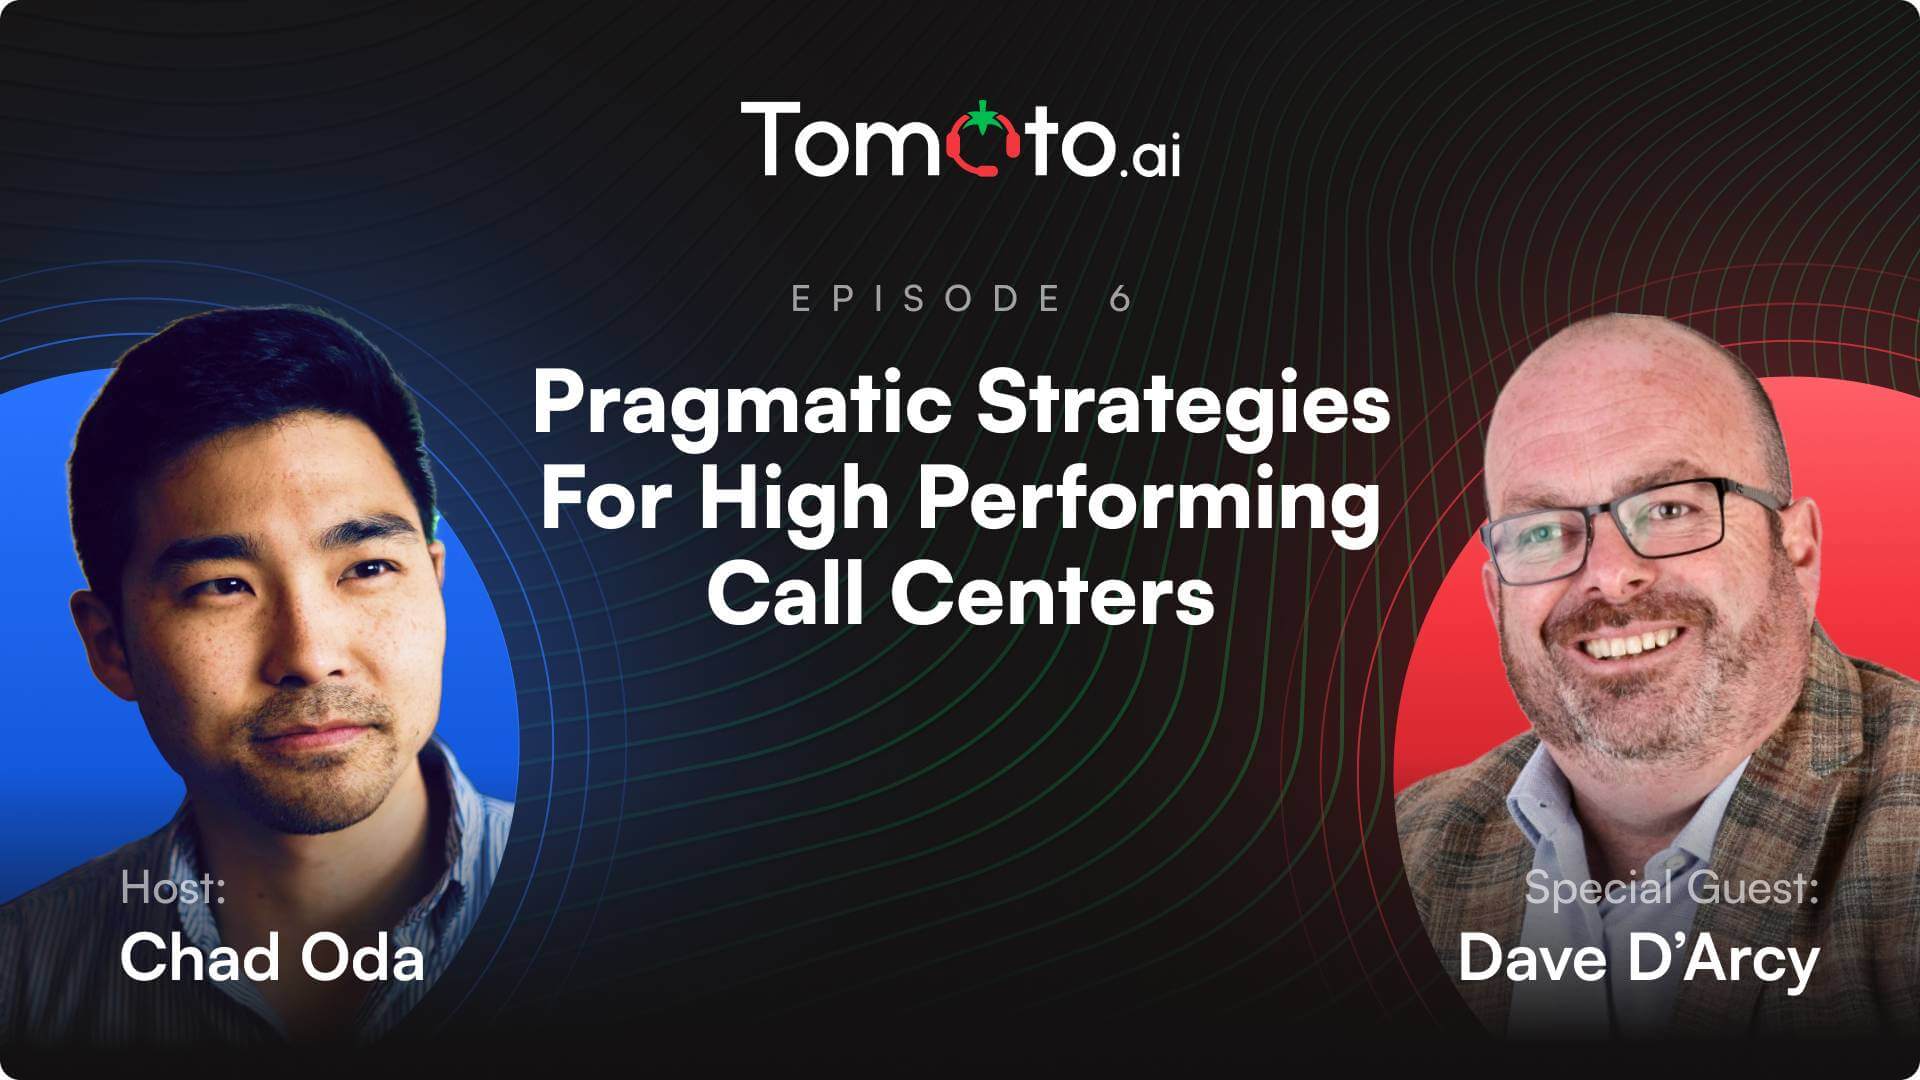 Pragmatic Strategies For High Performing Call Centers